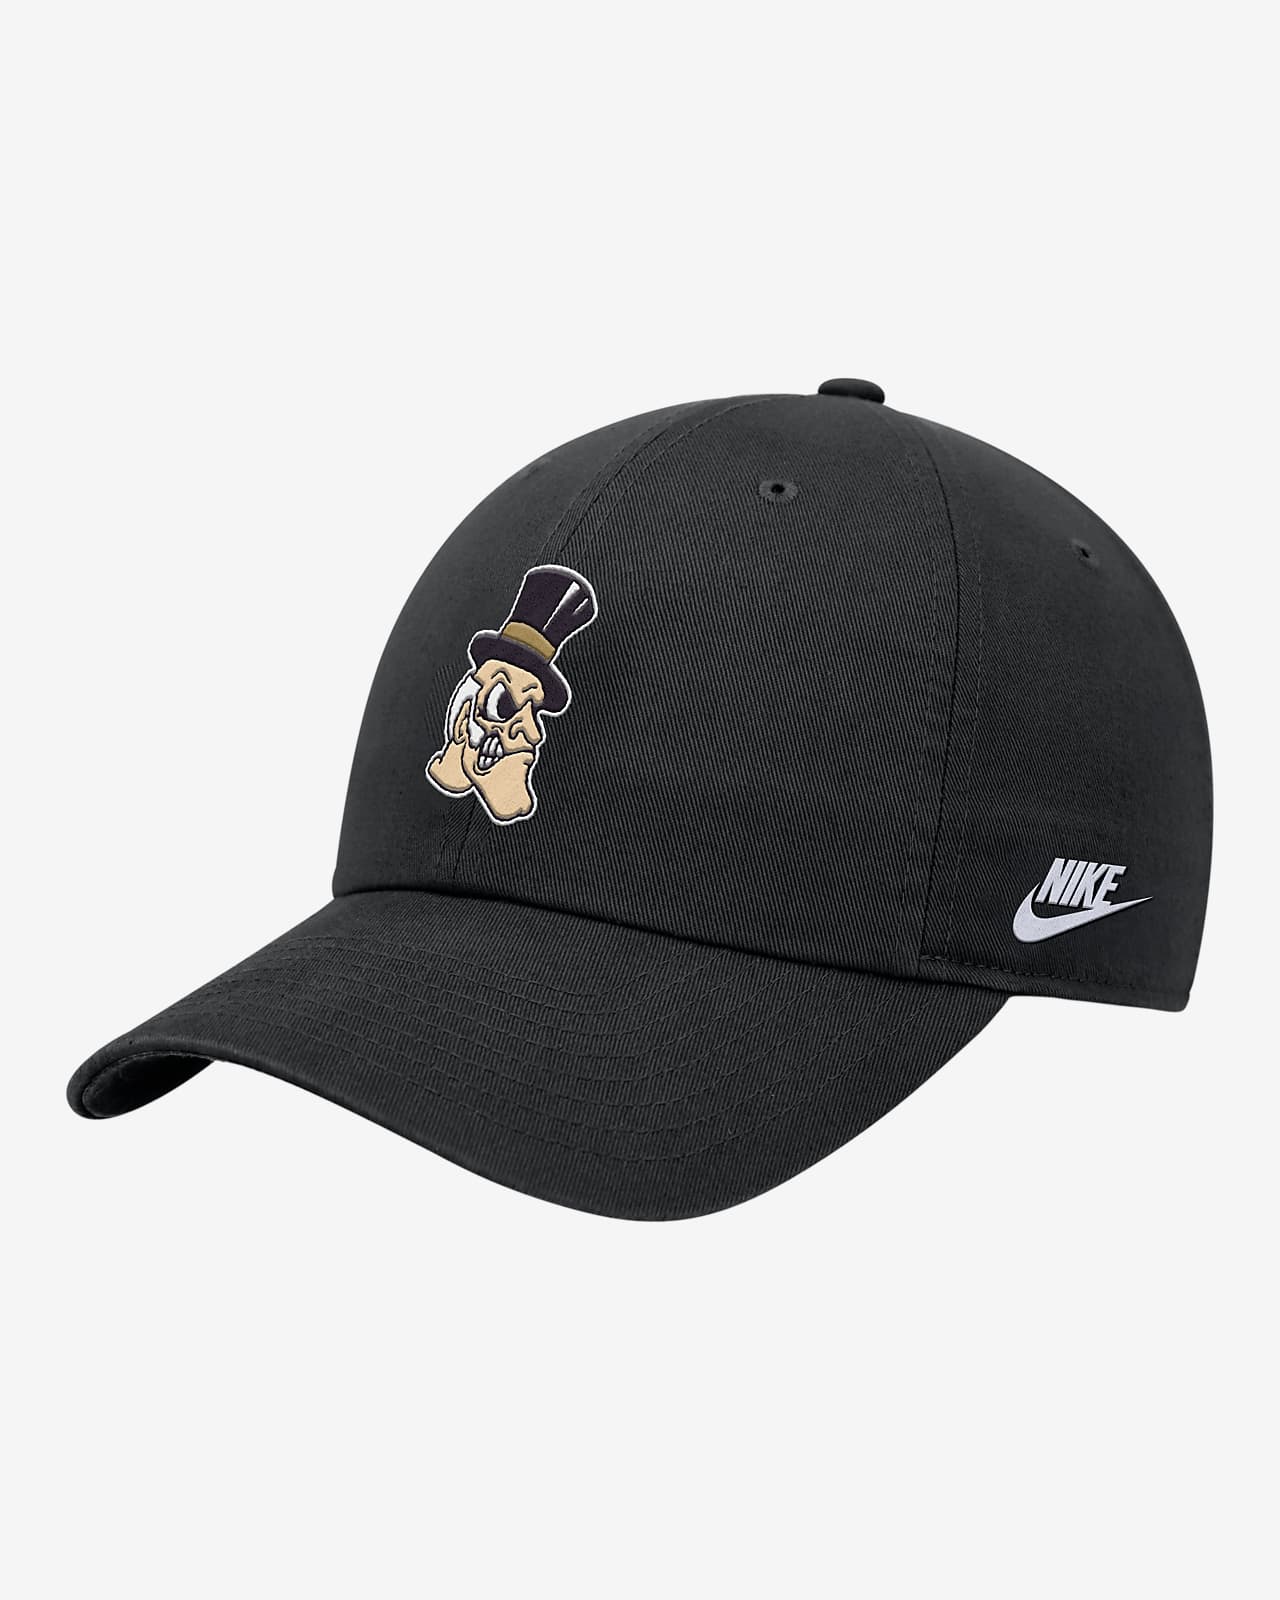 Wake Forest Nike College Cap